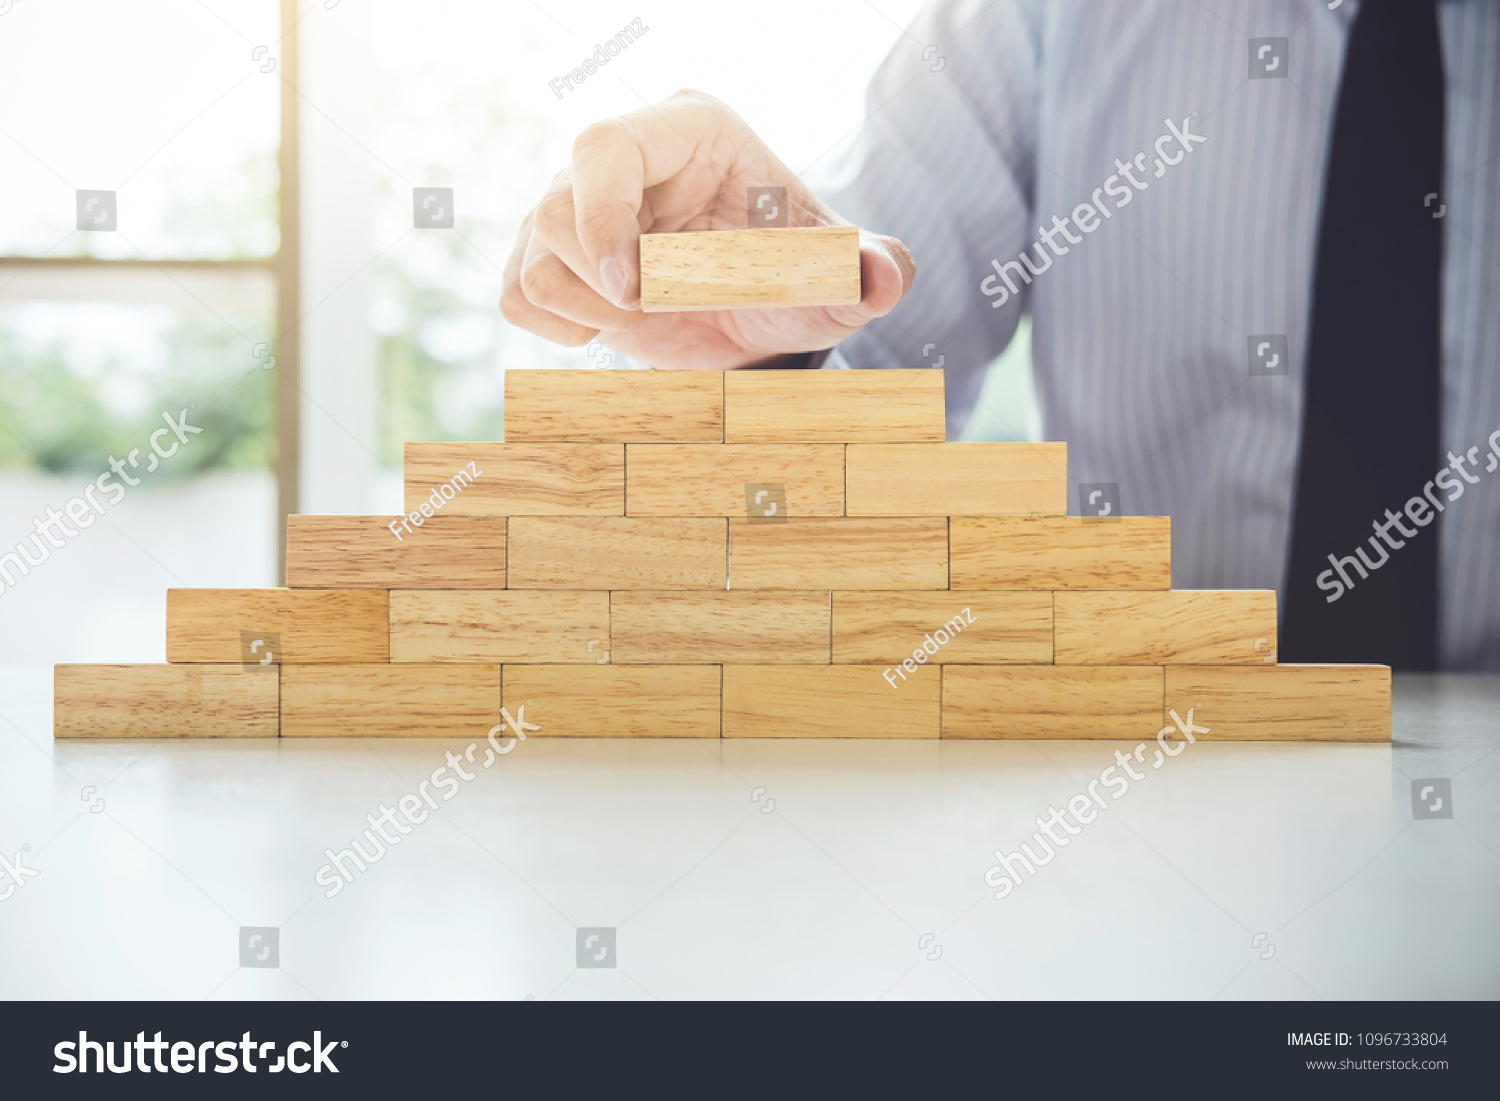 Plan and strategy in business, Risk To Make Business Growth Concept With Wooden Blocks, hand of man has piling up and stacking a wooden block. #1096733804